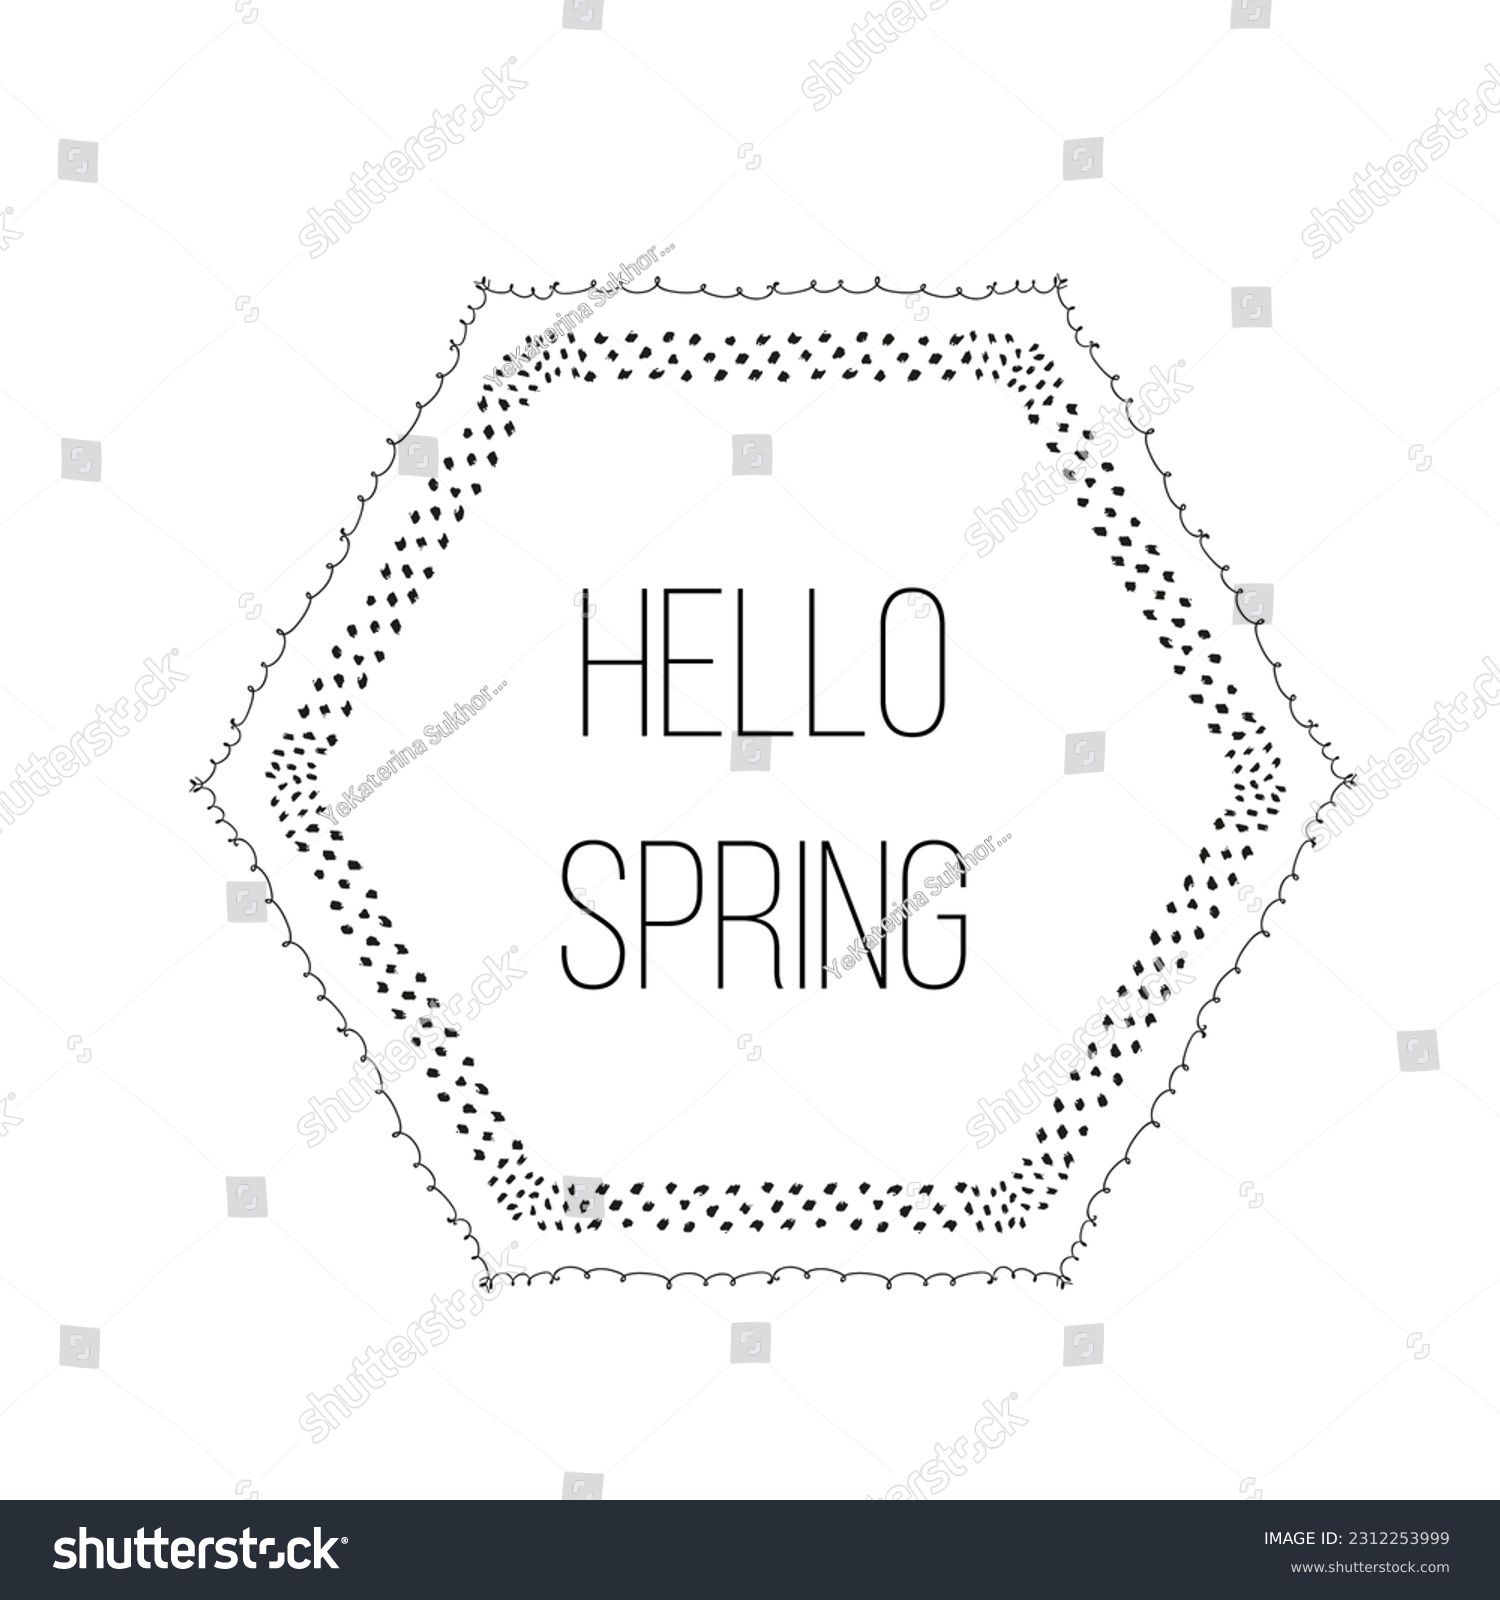 SVG of Elements Decorative Ornaments Bundle Flower svg Flourish Frame Swoosh. Greek key decorative border, constructed from continuous lines, shaped into a repeated motif. Hello spring svg